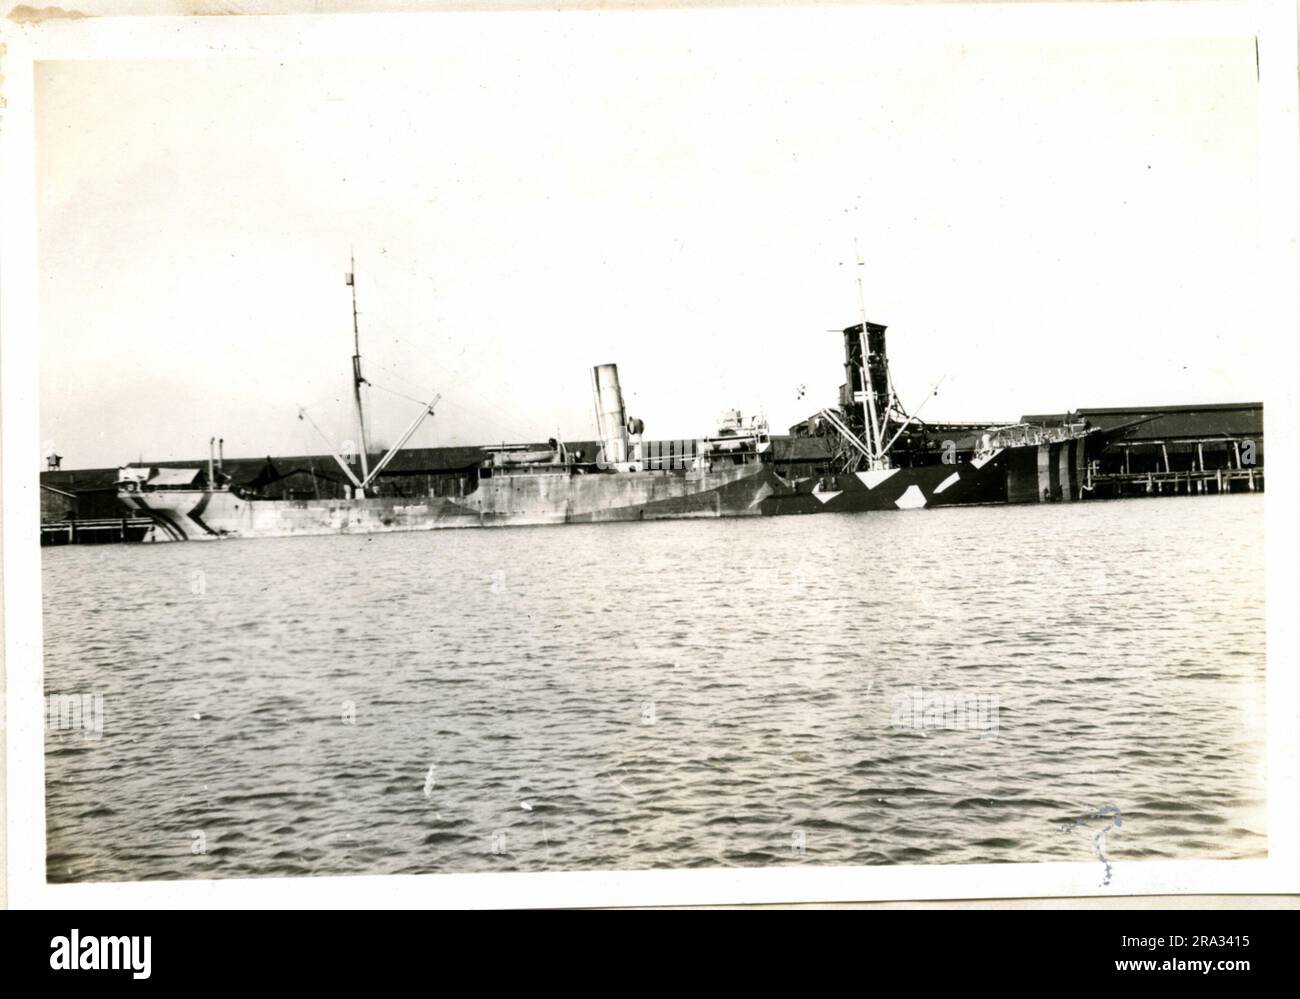 Photograph of the Starboard View of the SS Bendoran. Starboard View. Date: - Oct. 20 1918. Photograph Of S. S. Bendoran. Nationality: -British. Tonnage: -4074. Captain: -D. T. Cadley. Owners: -Wm. Thomson & Co. Leith, Scotland. Where From: - Huelva, Spain. Destination: Brunswick GA. & Liverpool, Eng. Where Photographed: Charleston S. C. Sixth Naval District. By Whom: J.B. Dearborn. Date: Sept. 5th. 1918. Where Camouflaged: Liverpool Eng. Date: Feb. 1918. By Whom: Wilson & Co. By Orders Of The British Goverment Government. Type Of Ship: Well Deck. Length 380ft. Beam 46 ft. Draft 23' 9'. Port Vi Stock Photo